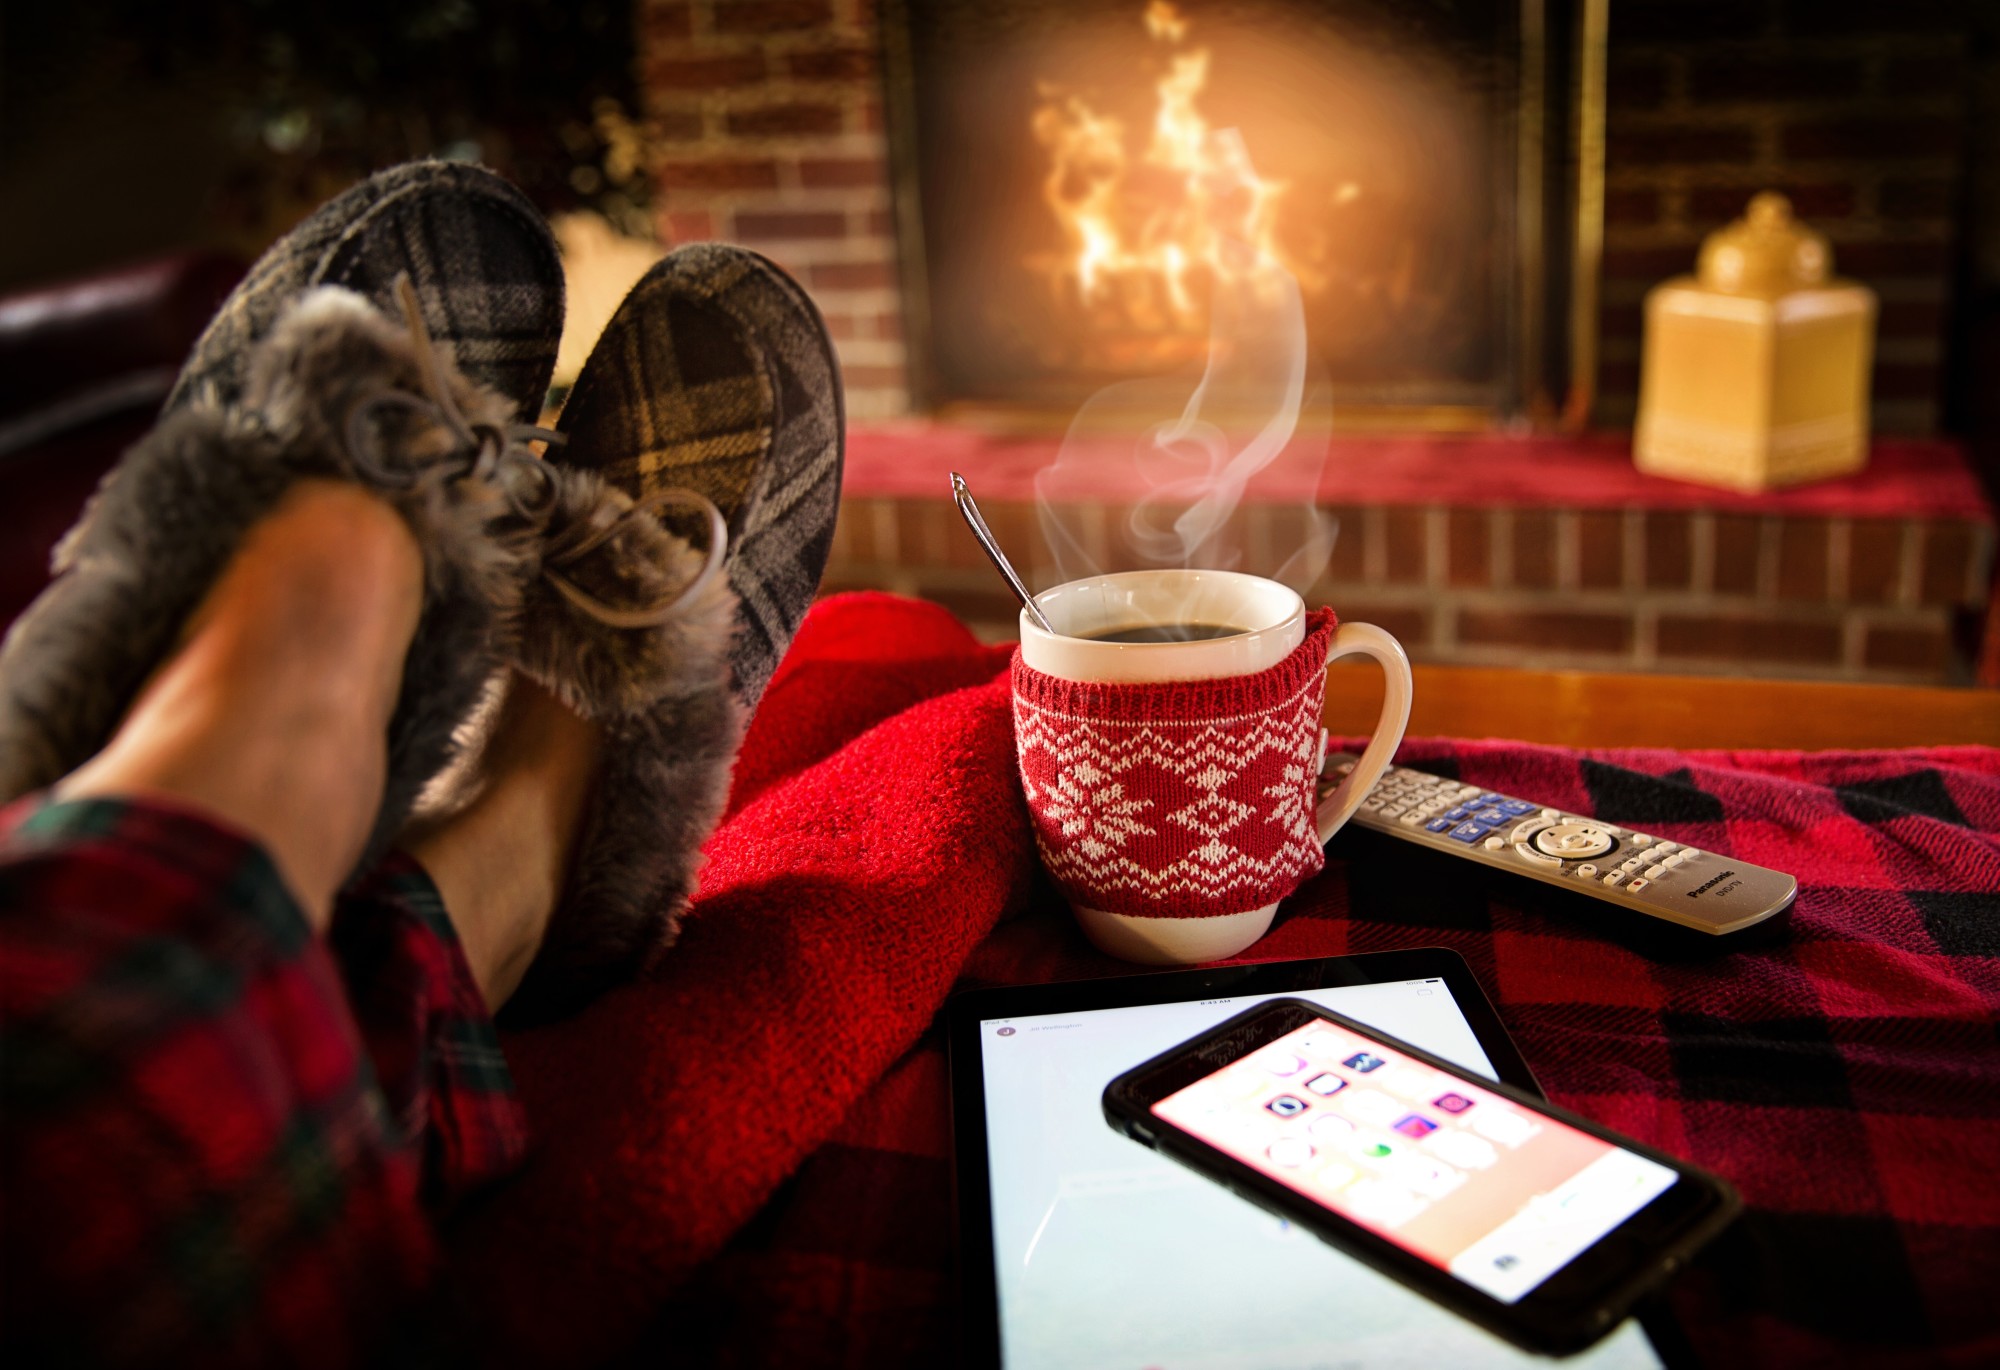 20 Cozy Things That Make Staying at Home During the Quarantine Fun